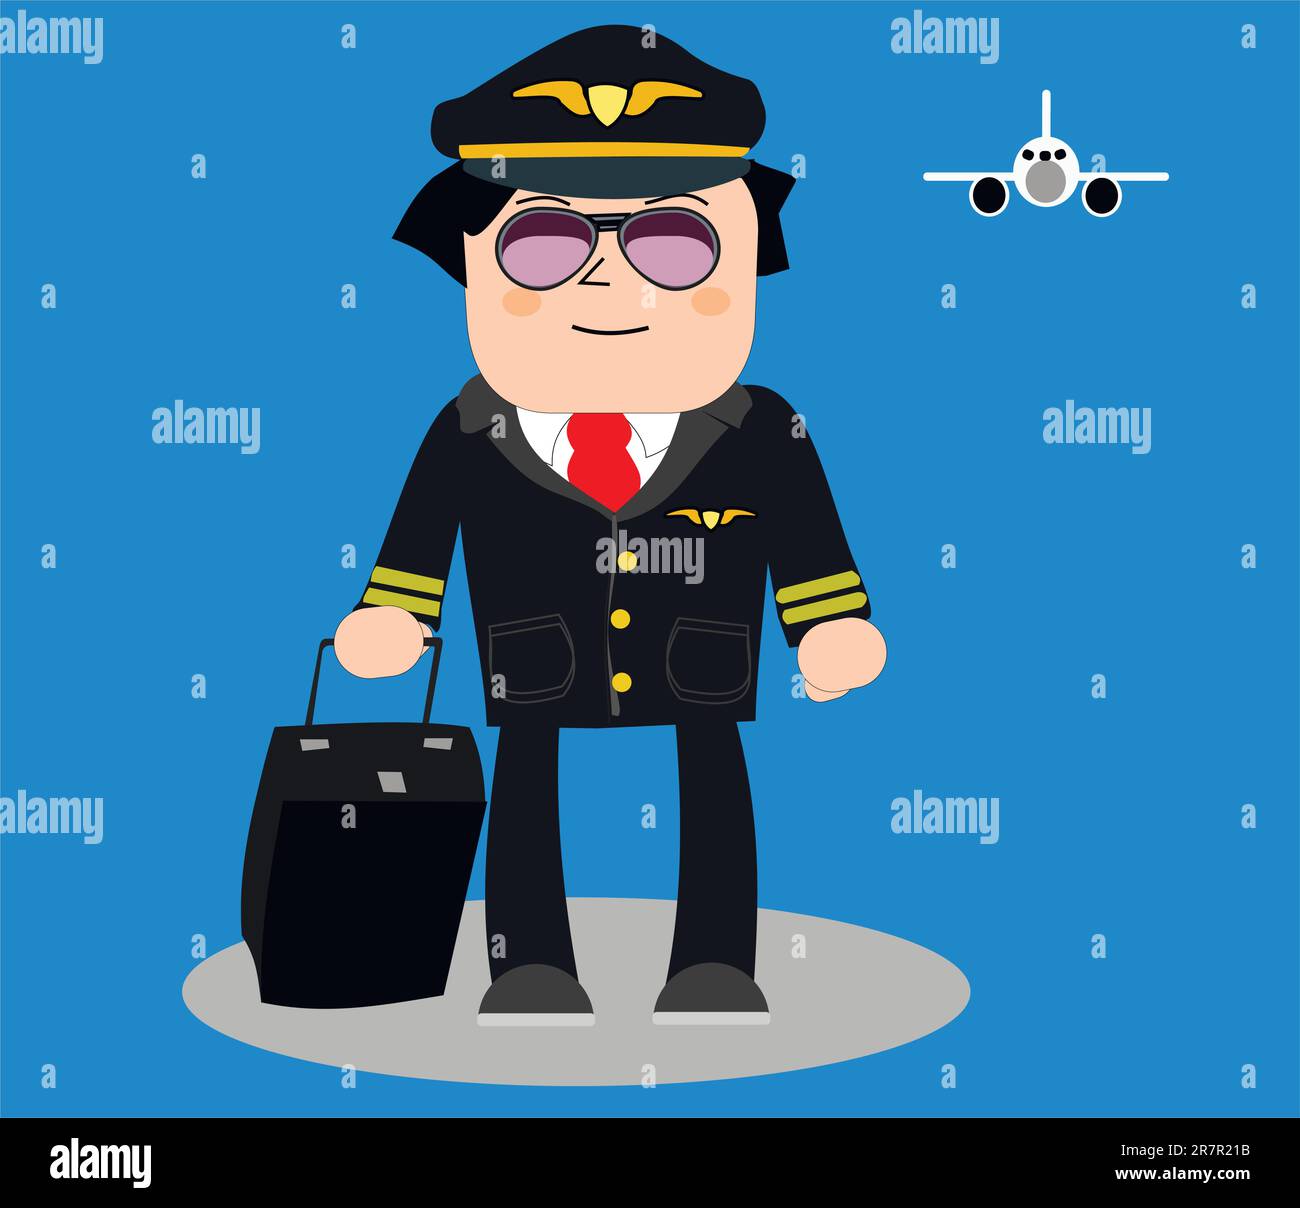 Vector illustration of an airline pilot standing on a landing strip. Stock Vector